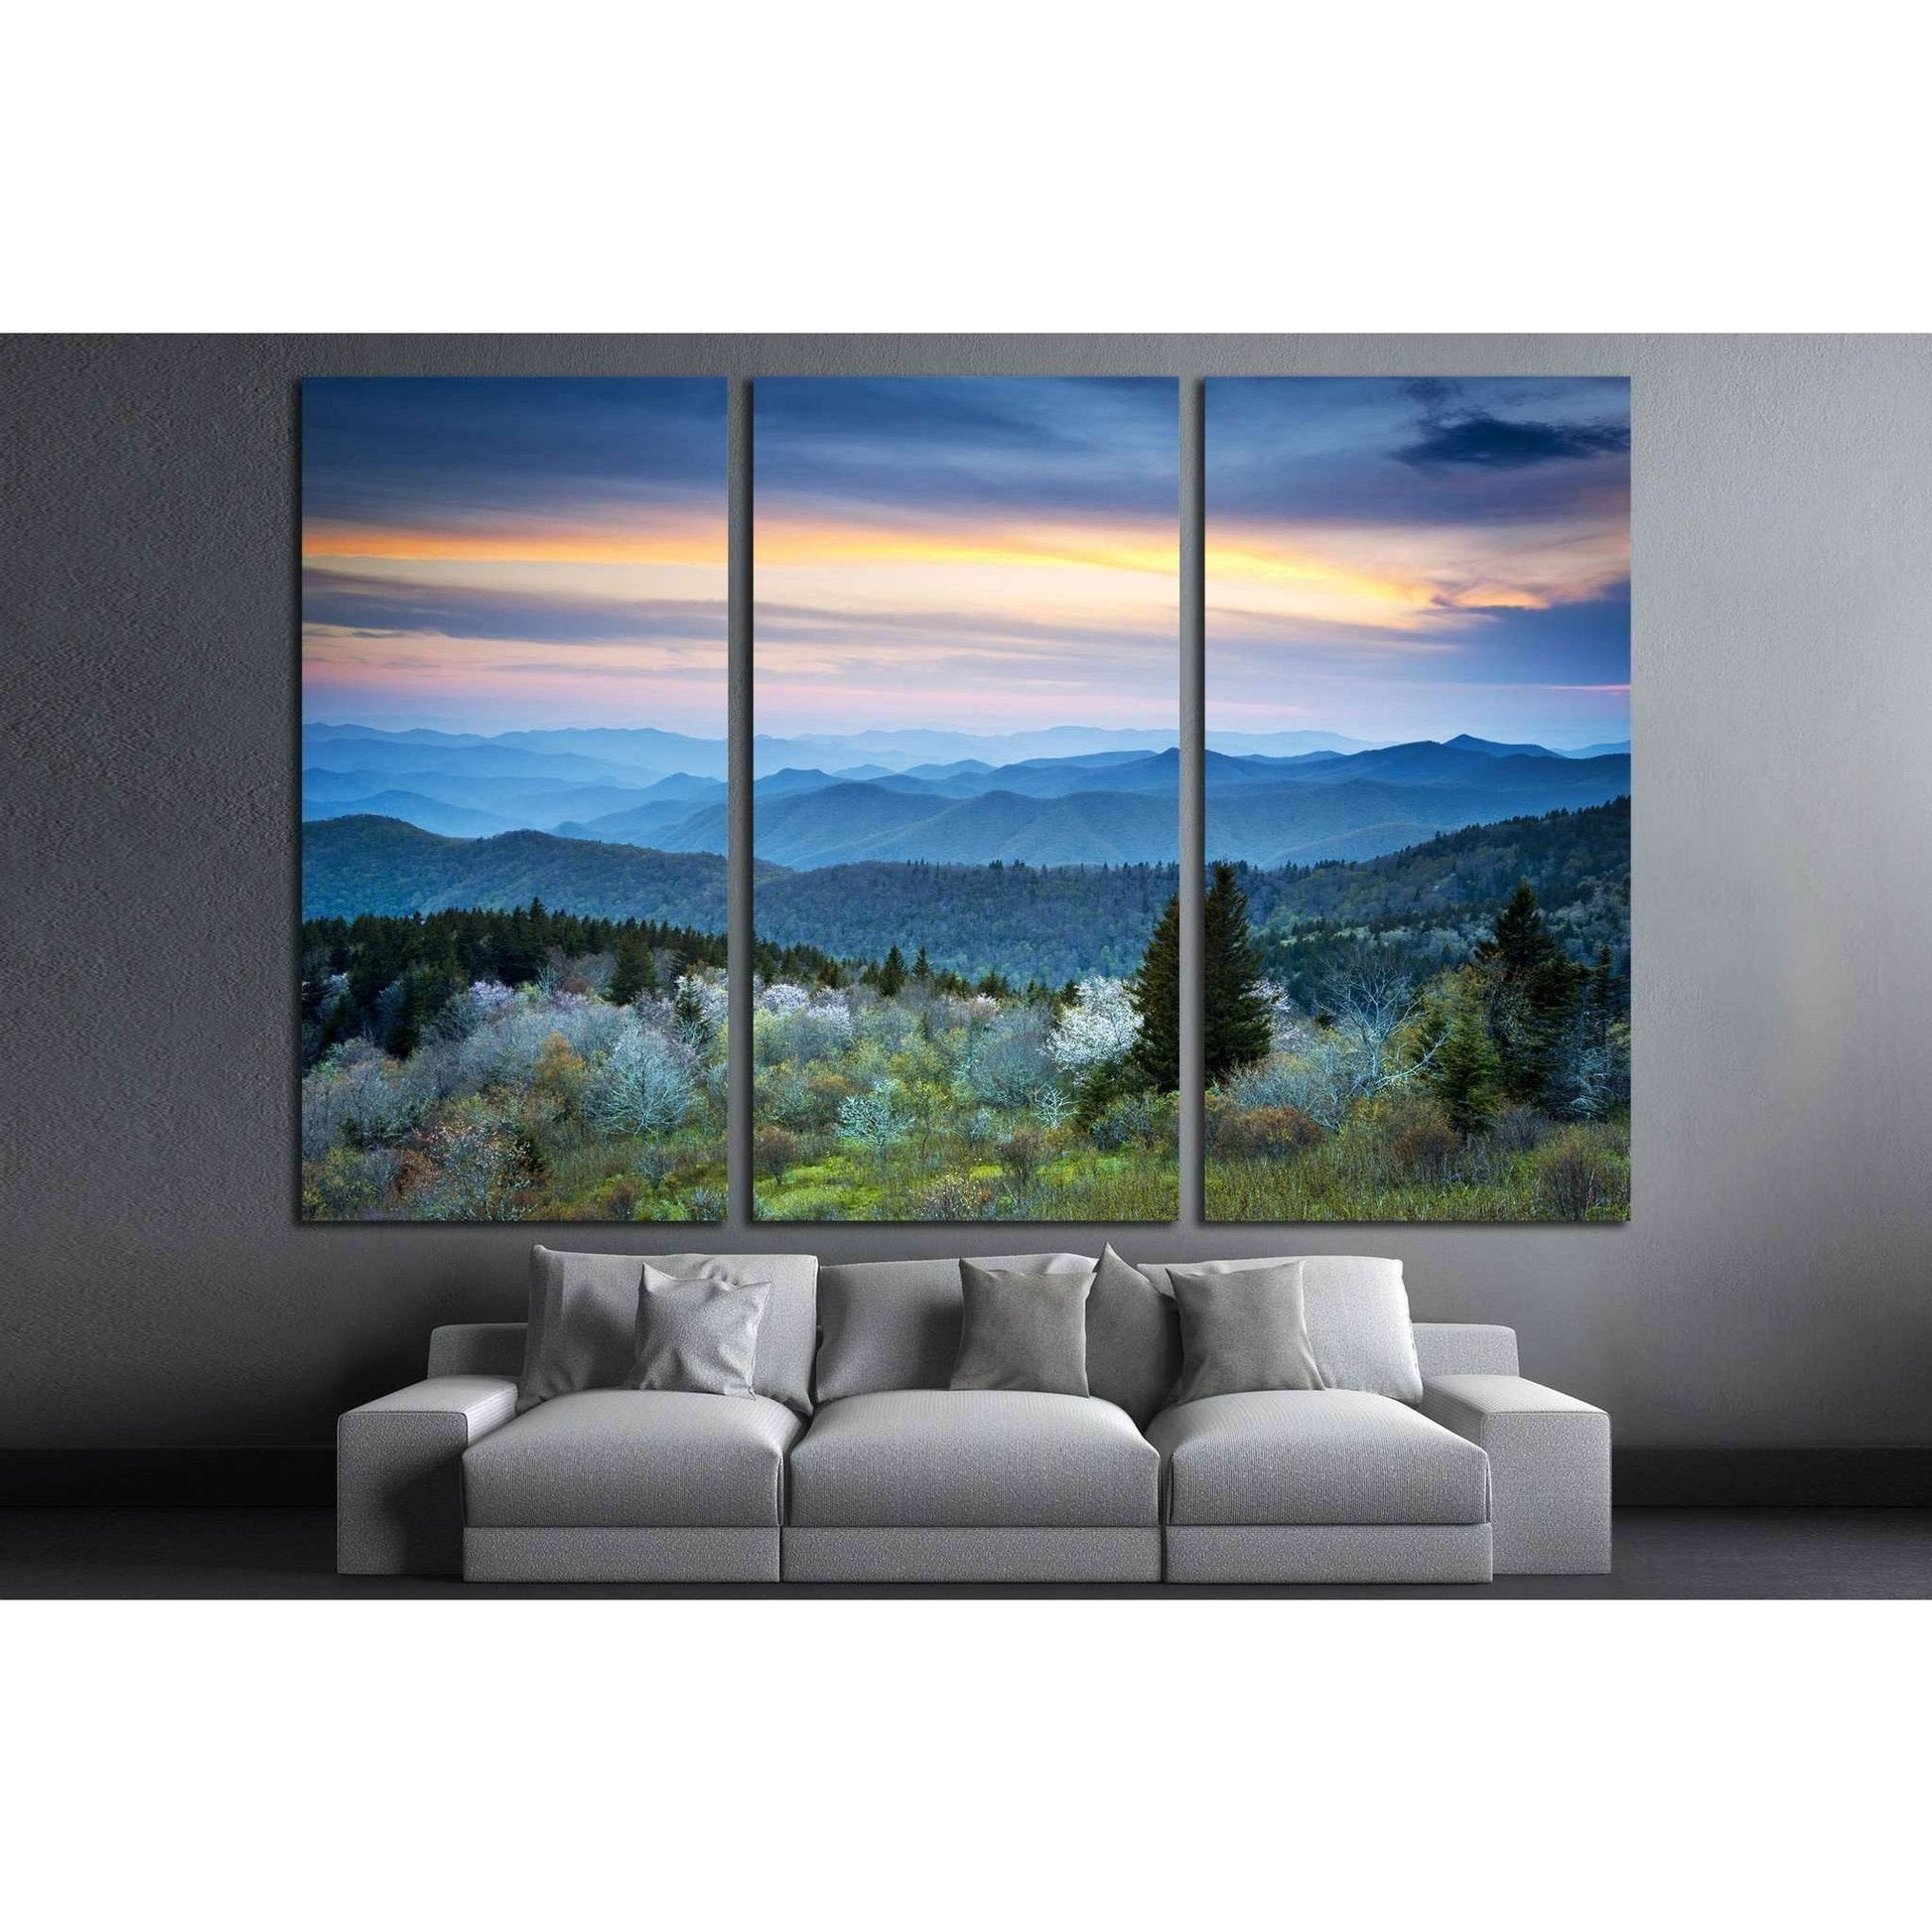 Calming Mountain Twilight Artwork for Spa Interior DesignThis canvas print captures a serene twilight scene over a layered mountain landscape, bathed in soft dusk light, ideal for creating a calming ambiance in spaces intended for relaxation or contemplat